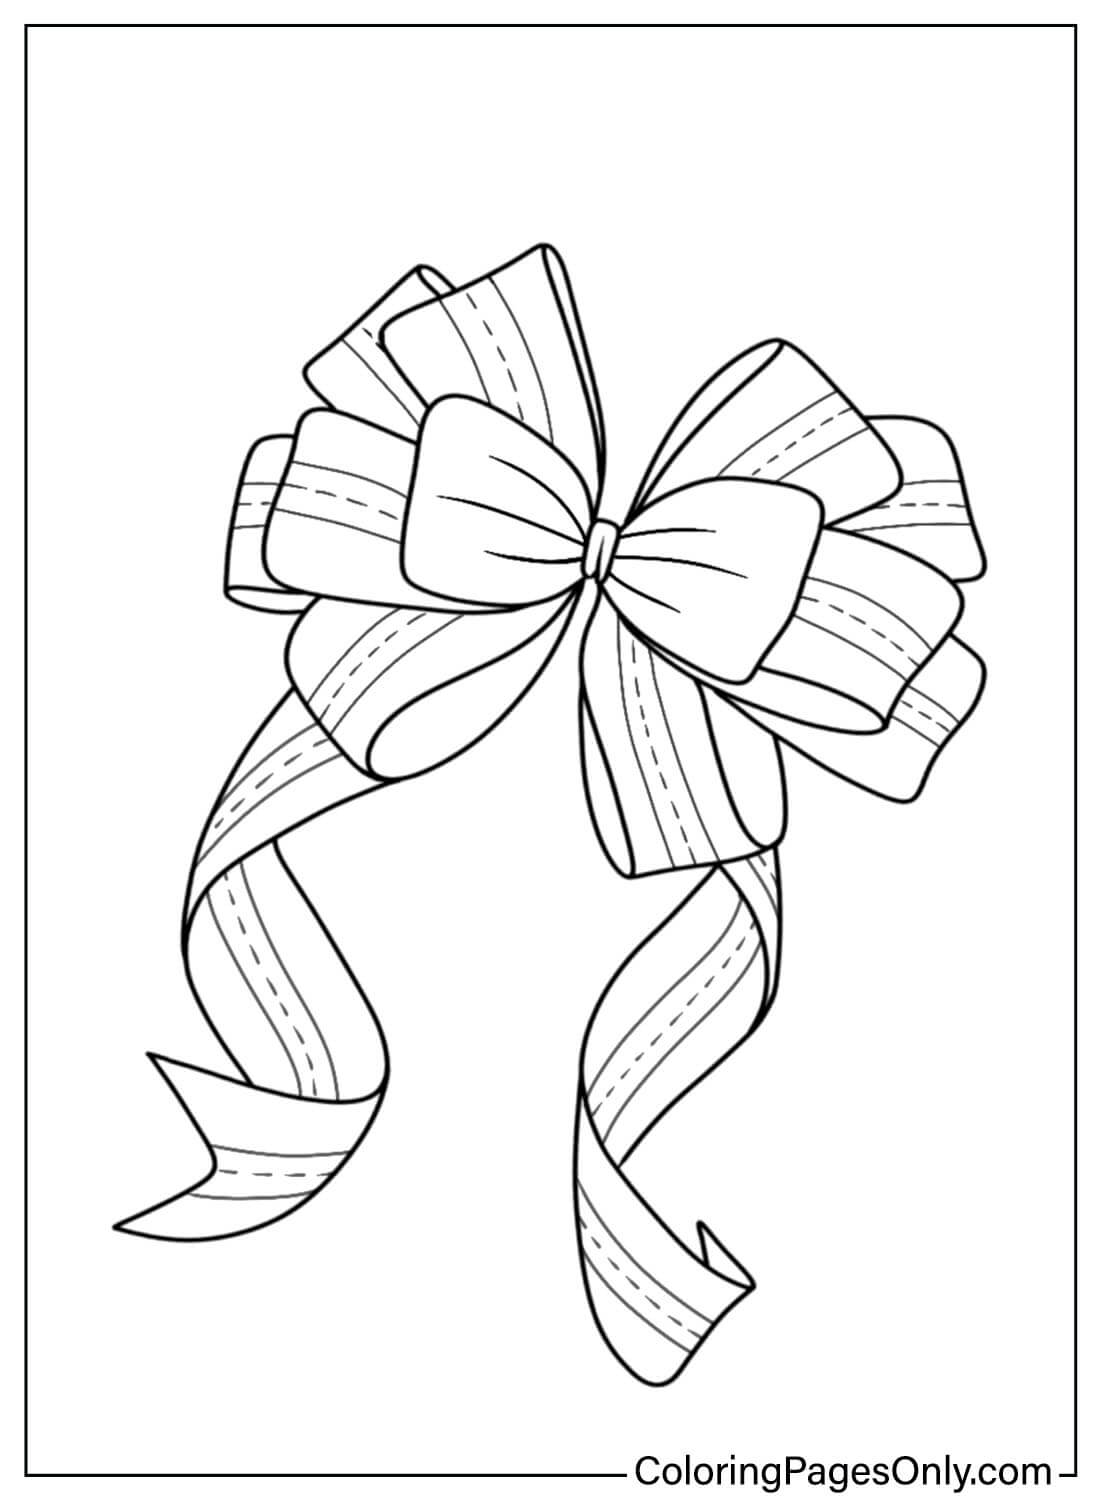 Bow Coloring Page from Bow